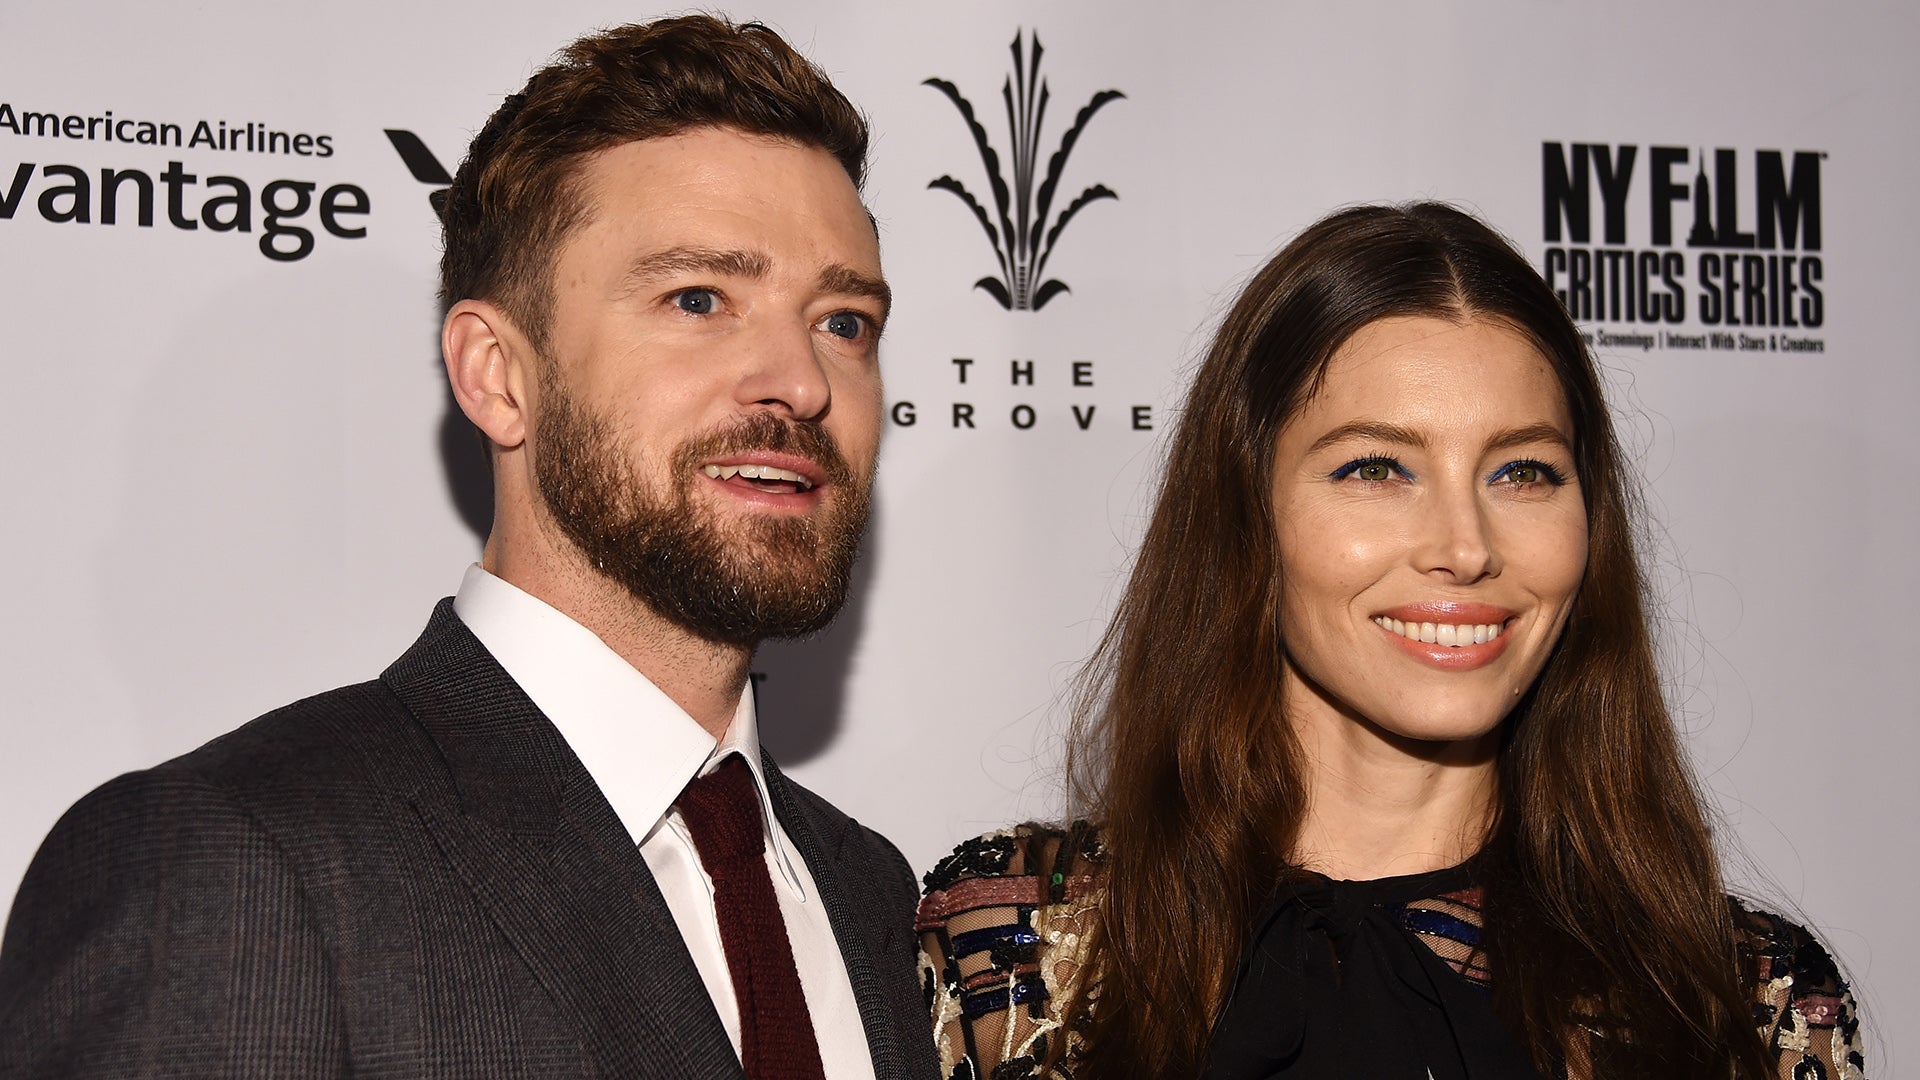 Jessica Biel shares rare pic of Justin Timberlake and sons